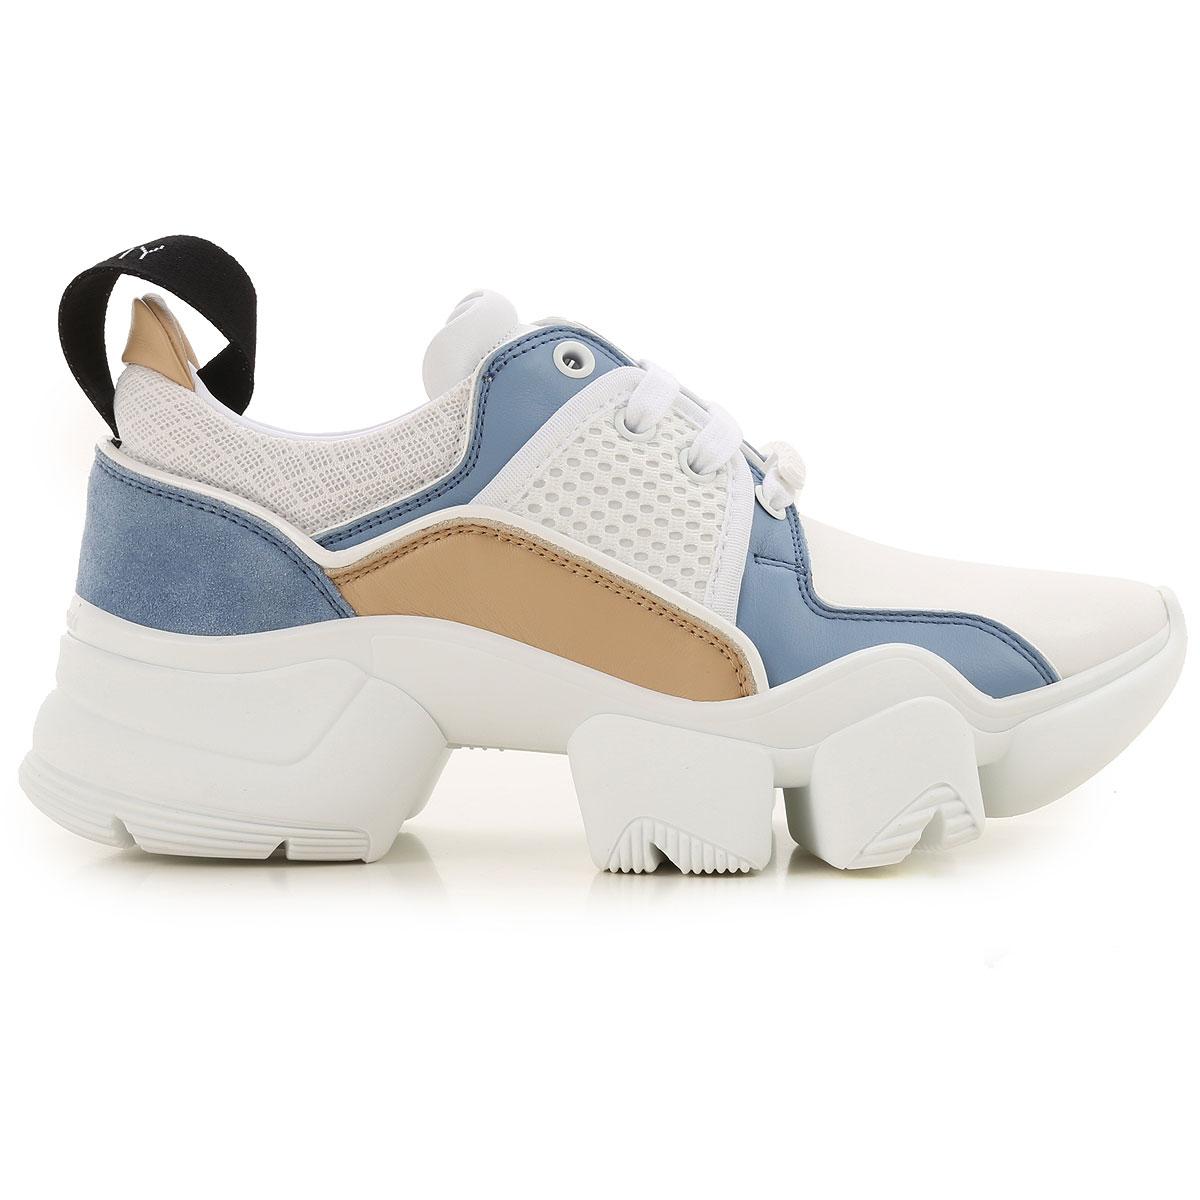 Givenchy Sneakers For Women in White - Lyst